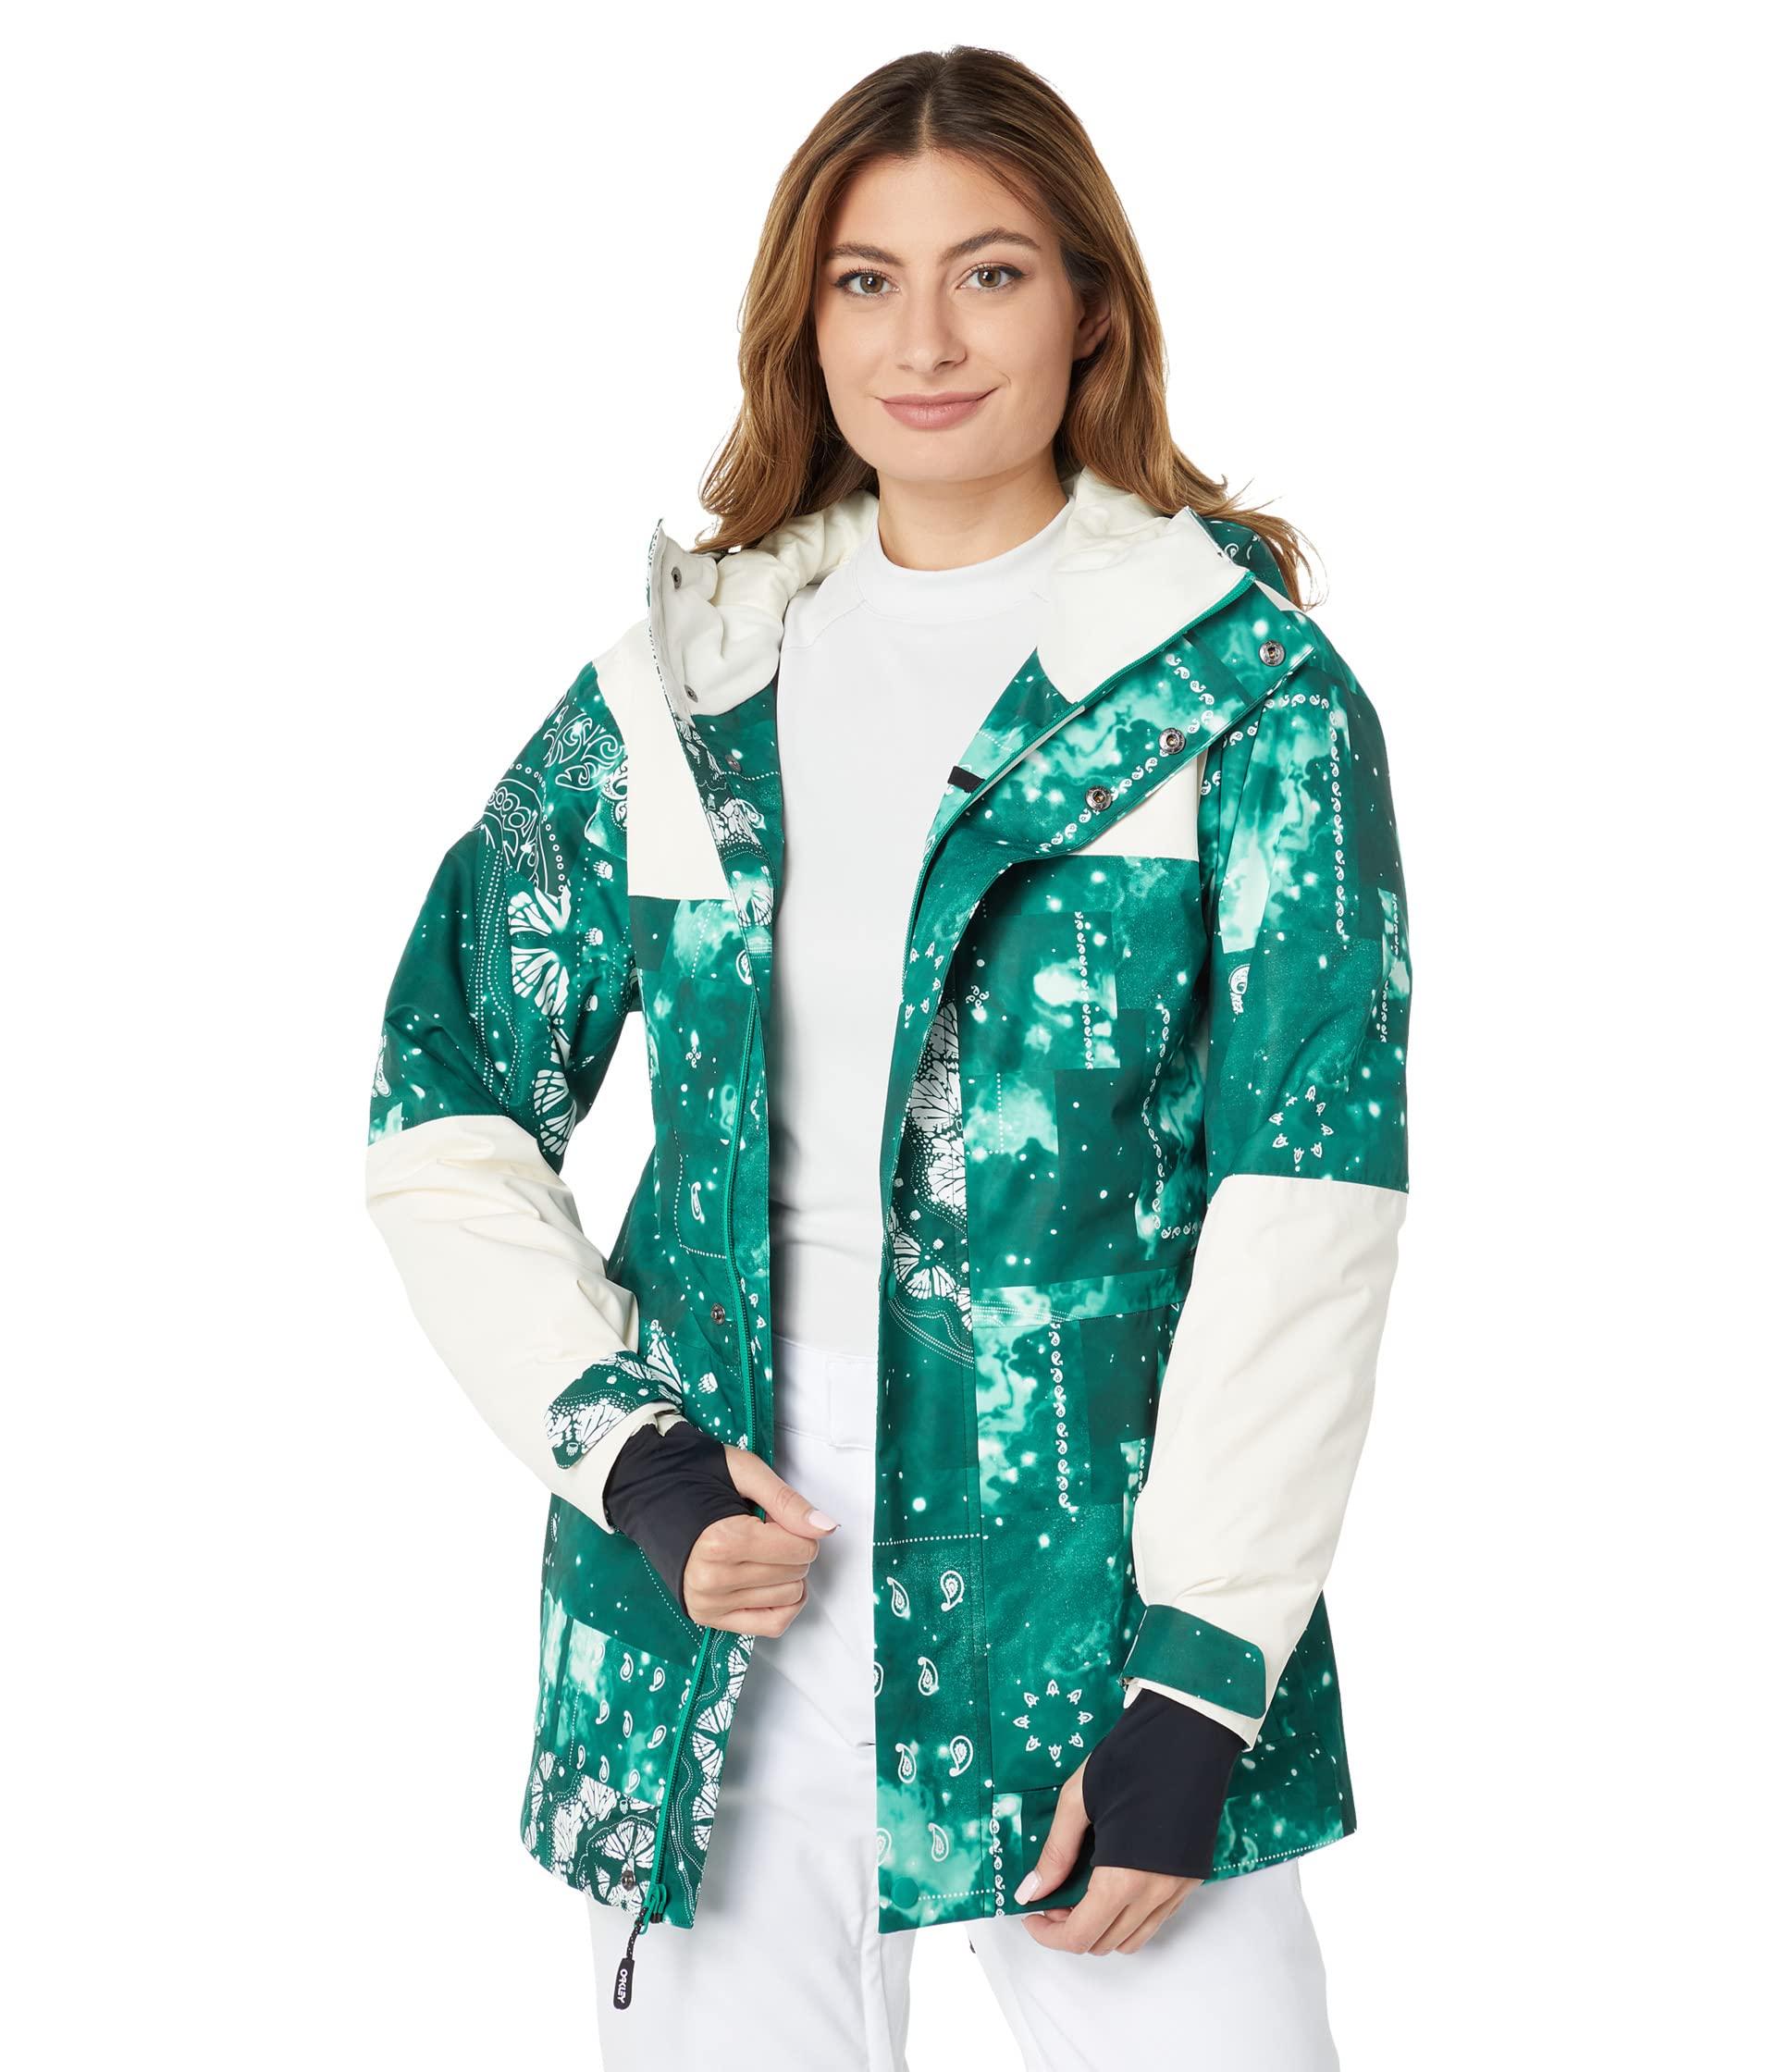 Oakley Tc Aurora Recycled Insulated Jacket in Green | Lyst